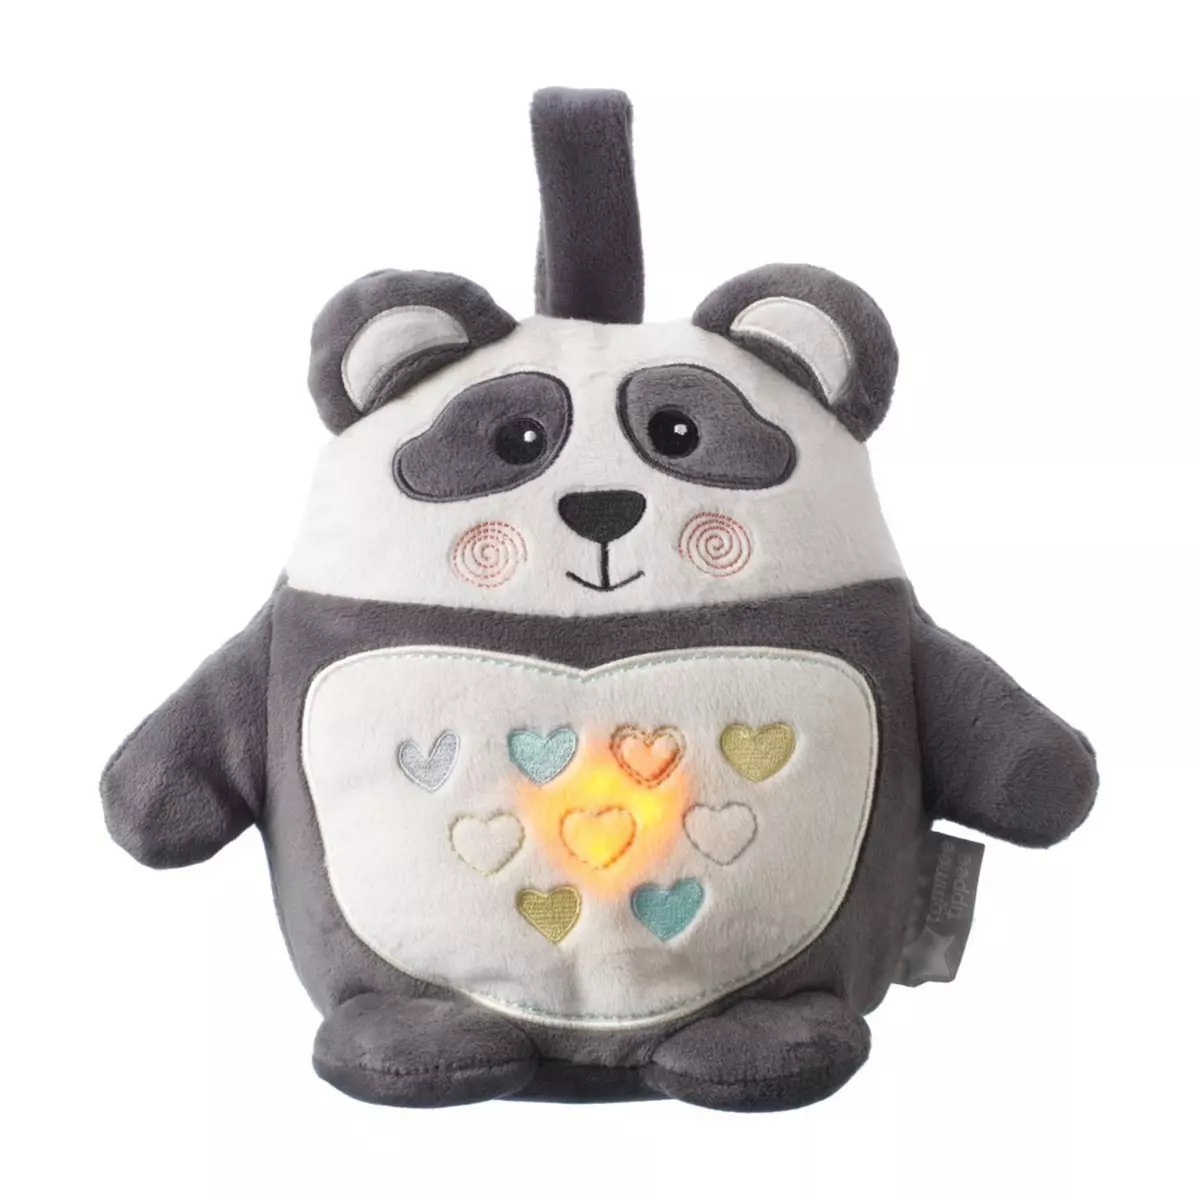 TOMMEE TIPPEE Peluche aide au sommeil Grofriend rechargeable - Pippo le Panda